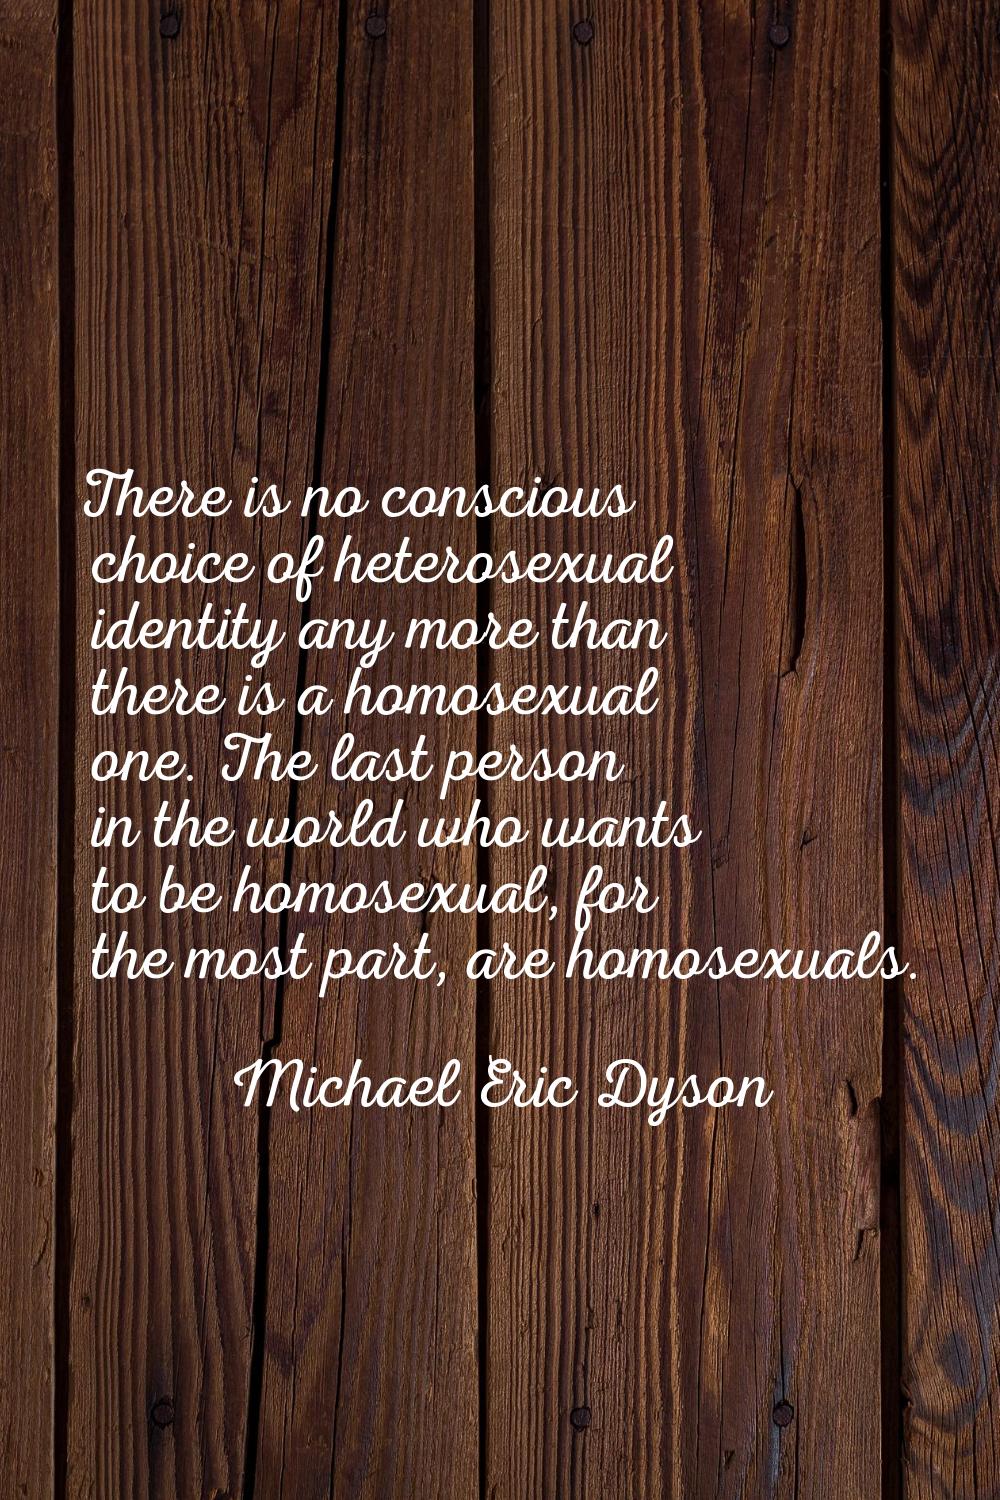 There is no conscious choice of heterosexual identity any more than there is a homosexual one. The 